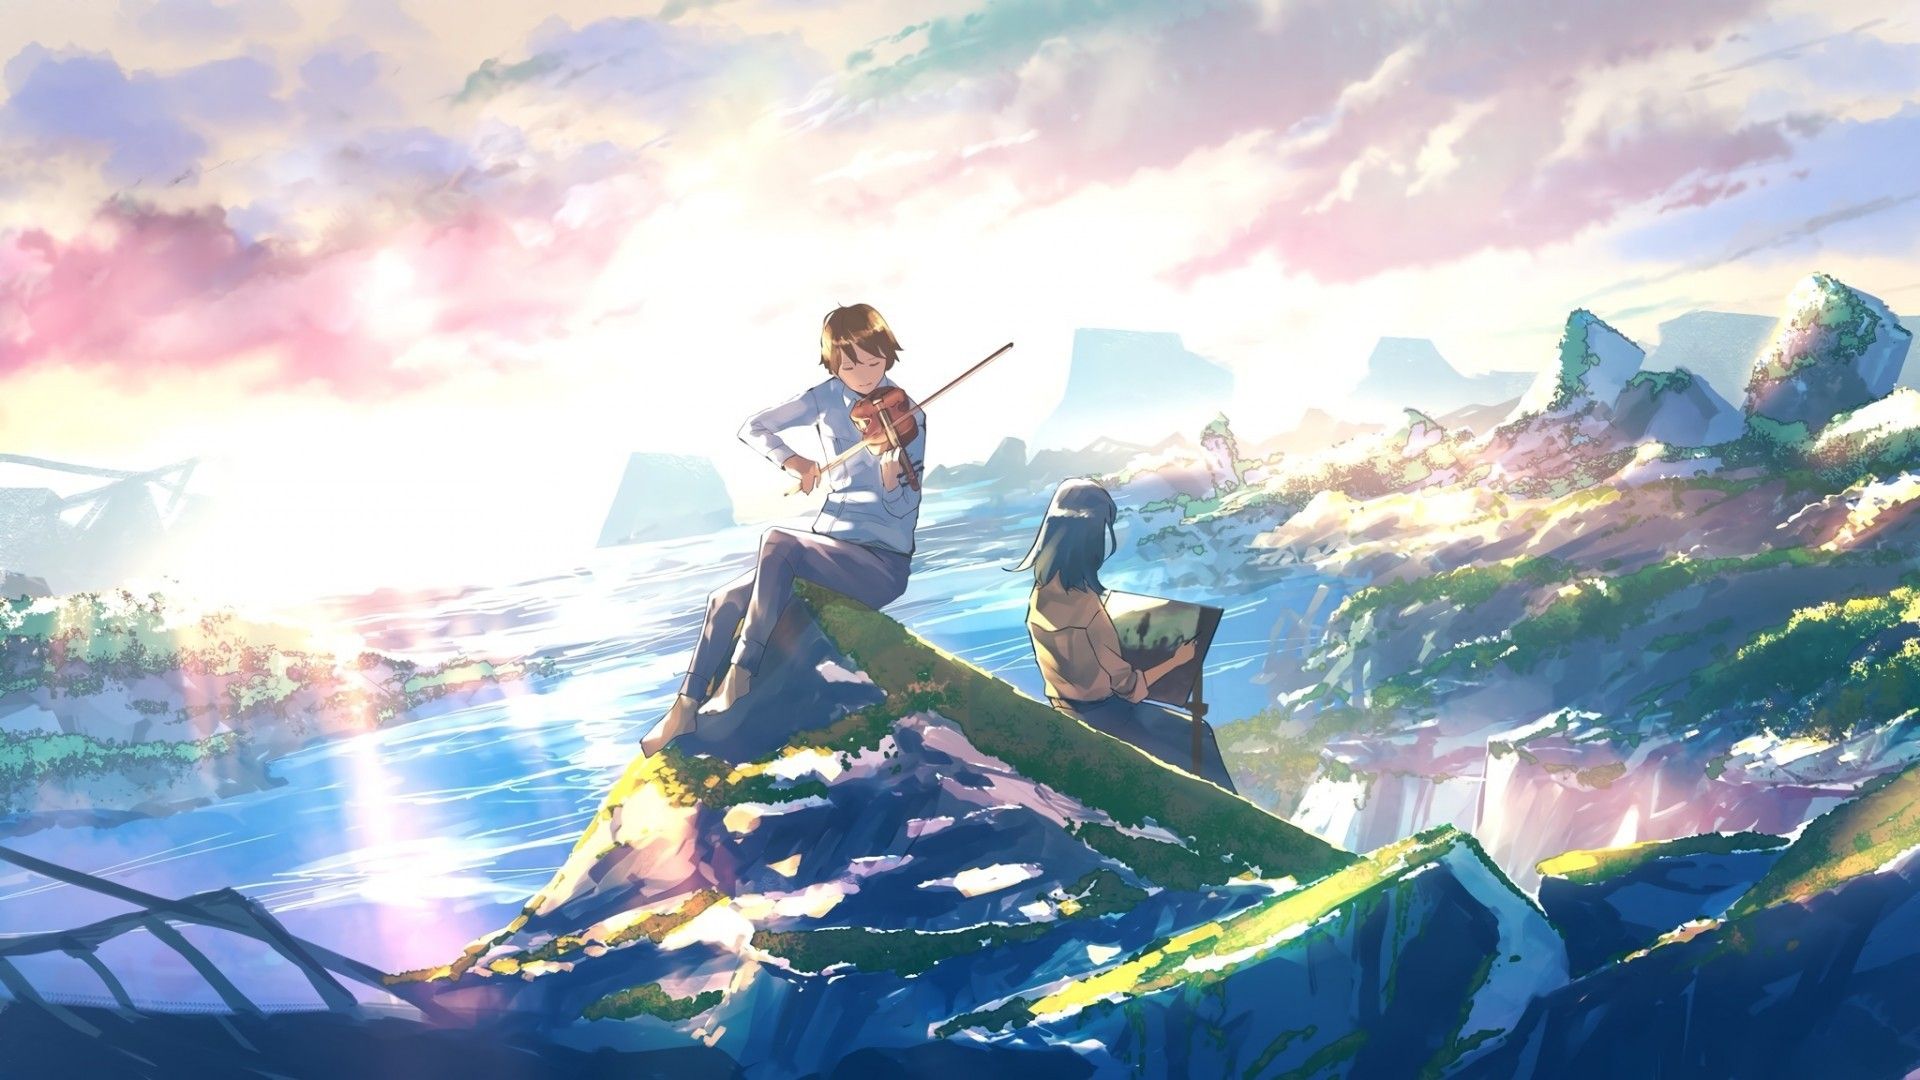 Download 1920x1080 Anime Boy And Girl, Violin, Painting, Scenic